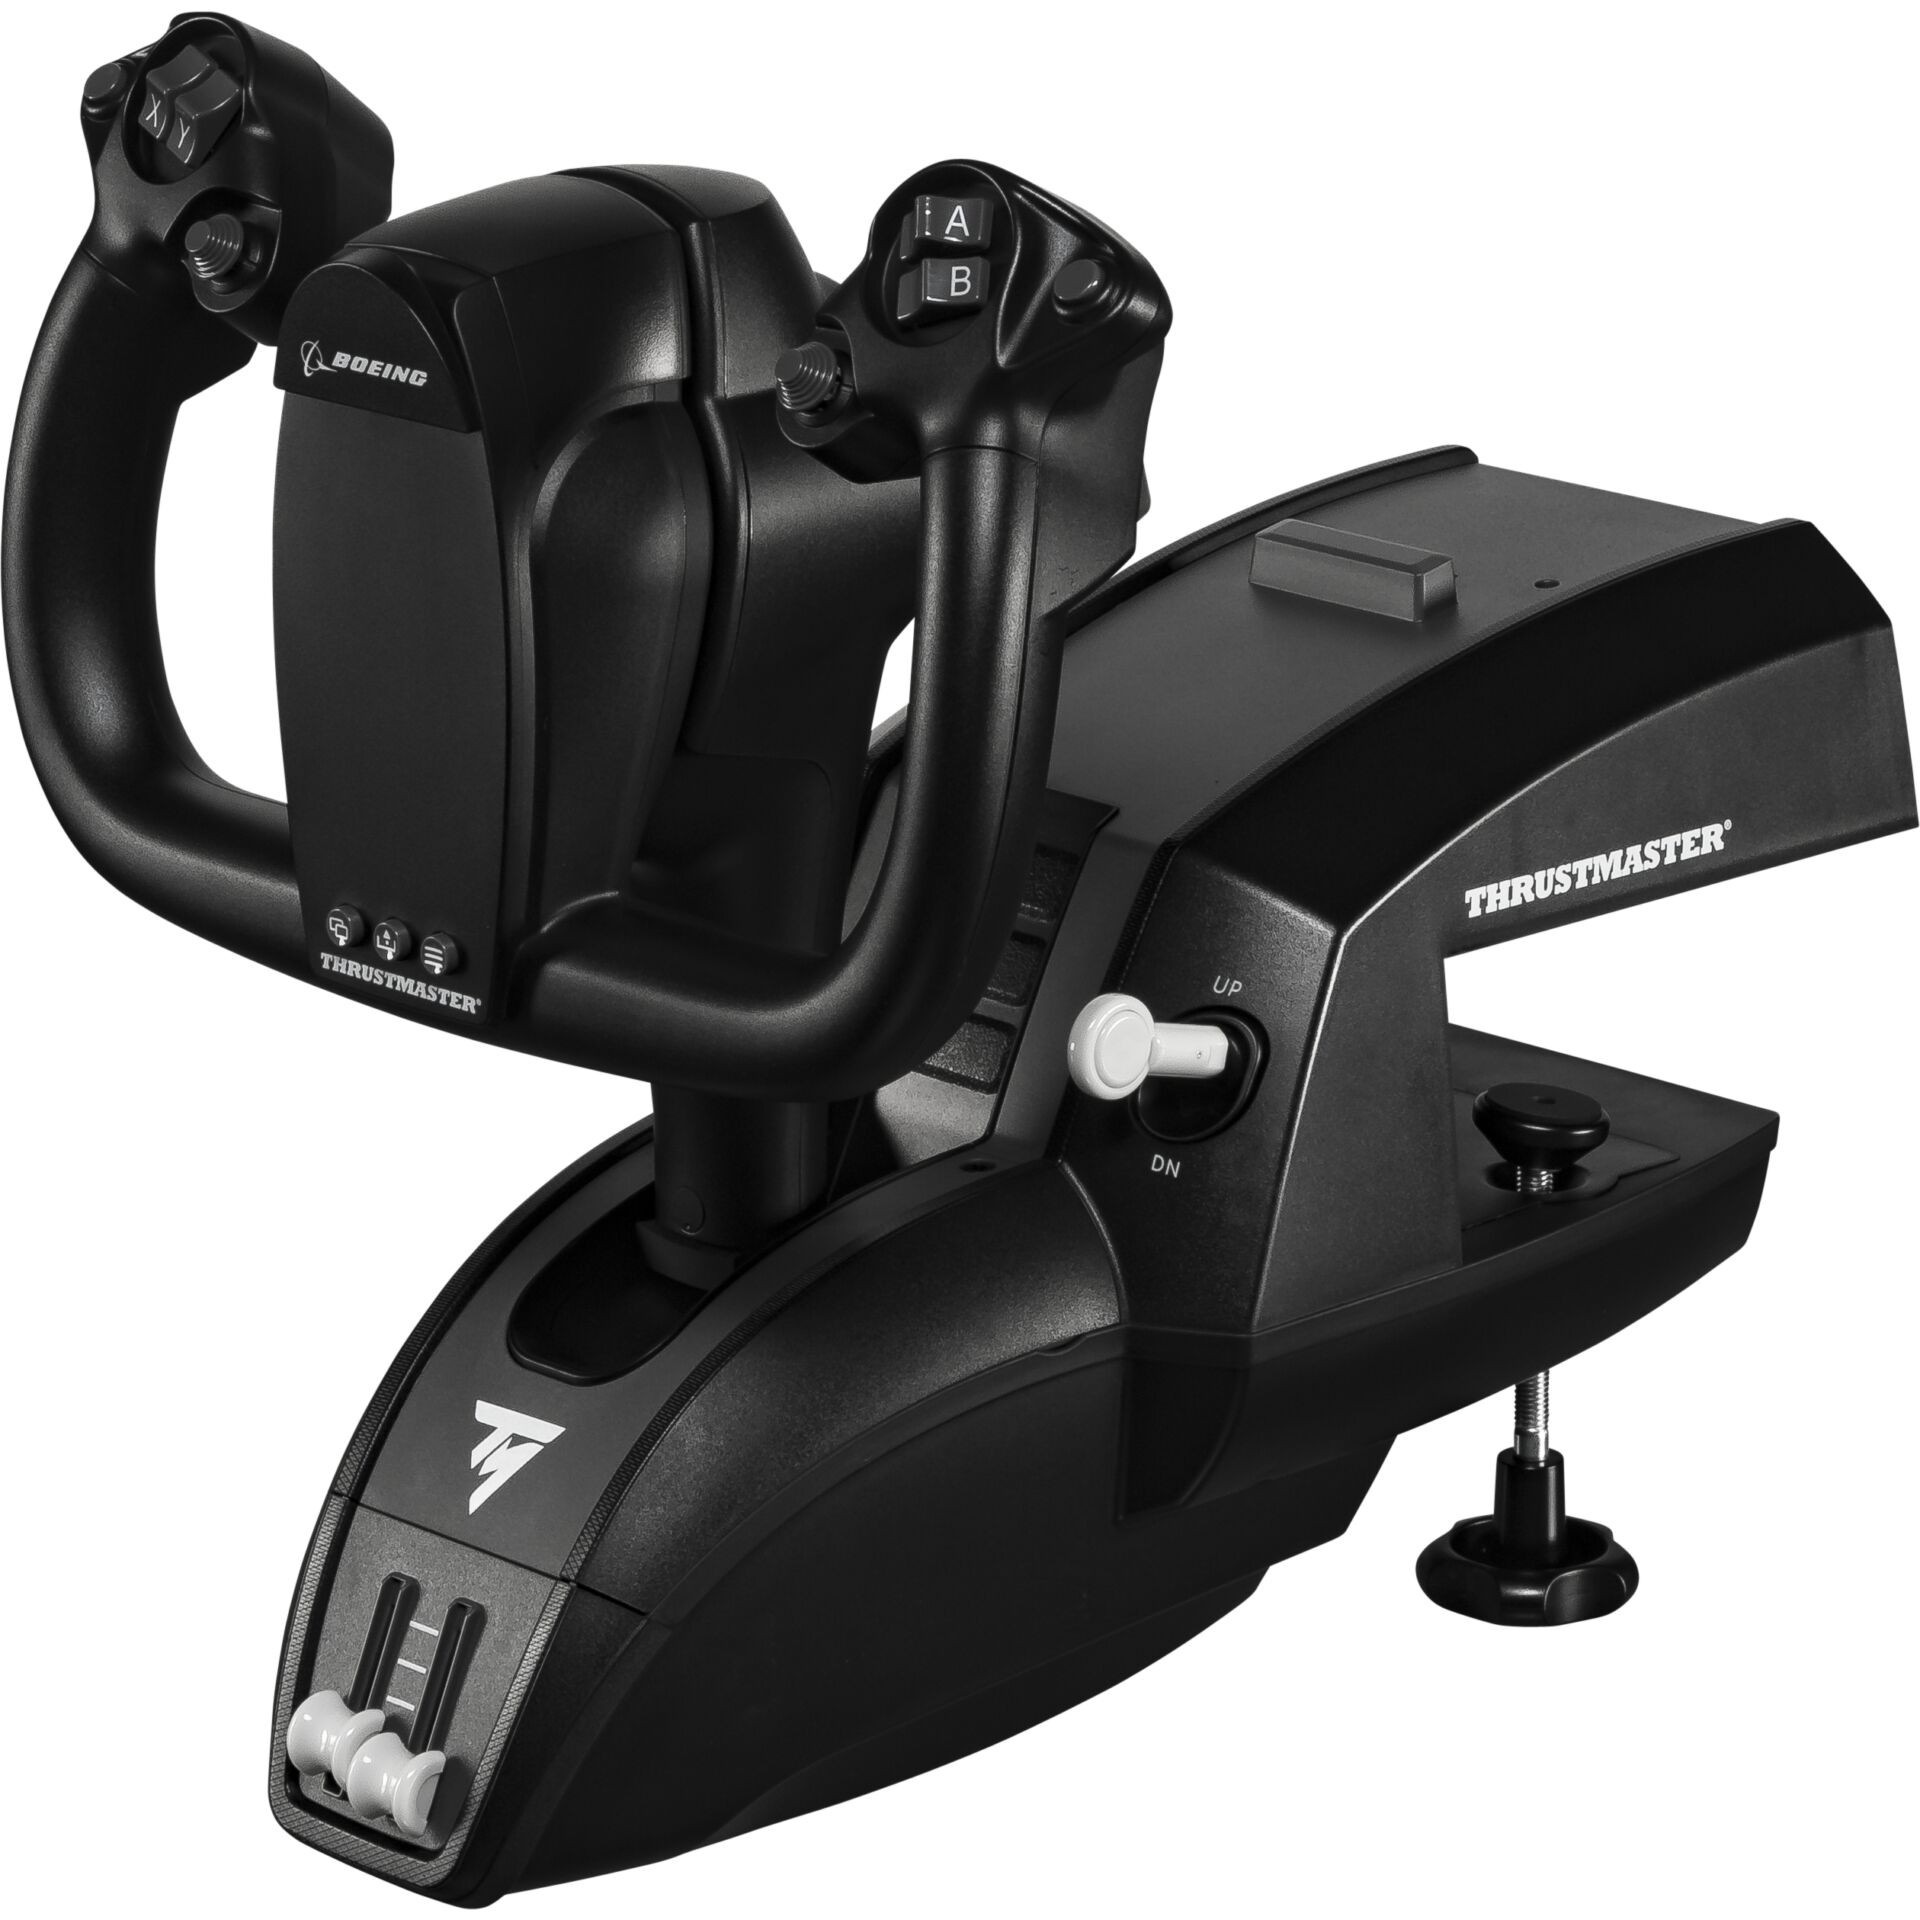 Thrustmaster TCA Yoke Pack Boeing Edition review: Become the